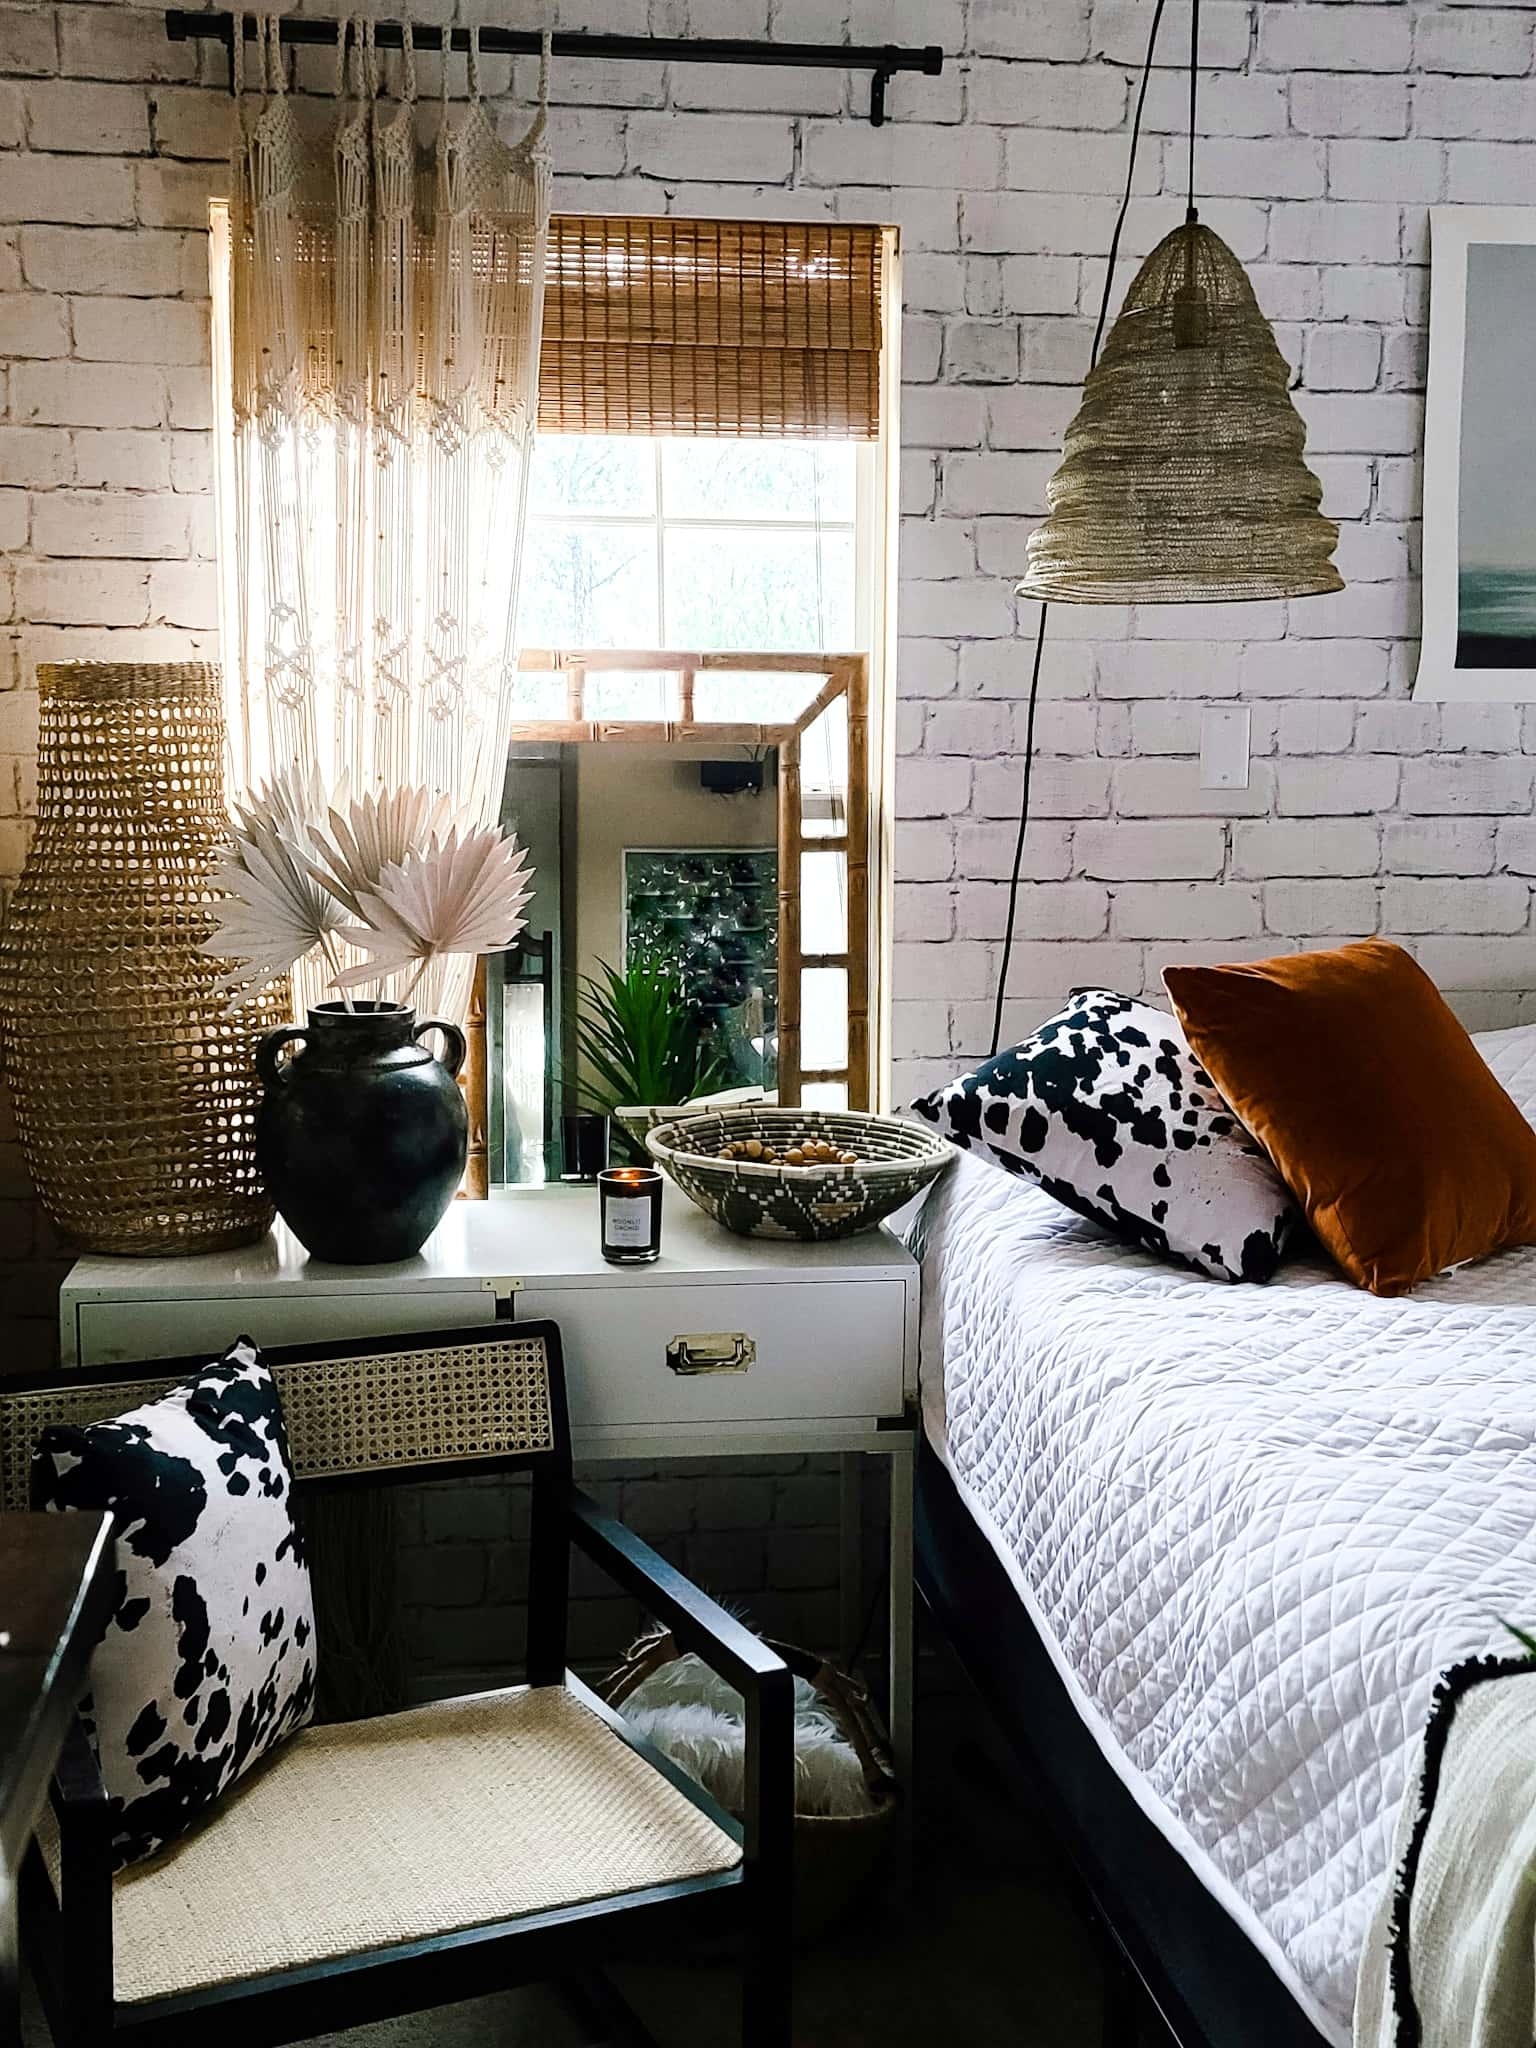 Gallery Wall Home Decor Bedroom Accessories Interior Design Master Bedroom makeover refresh industrial modern boho chic texture black and white baskets cowhide bedding bamboo mirror Joss & Main